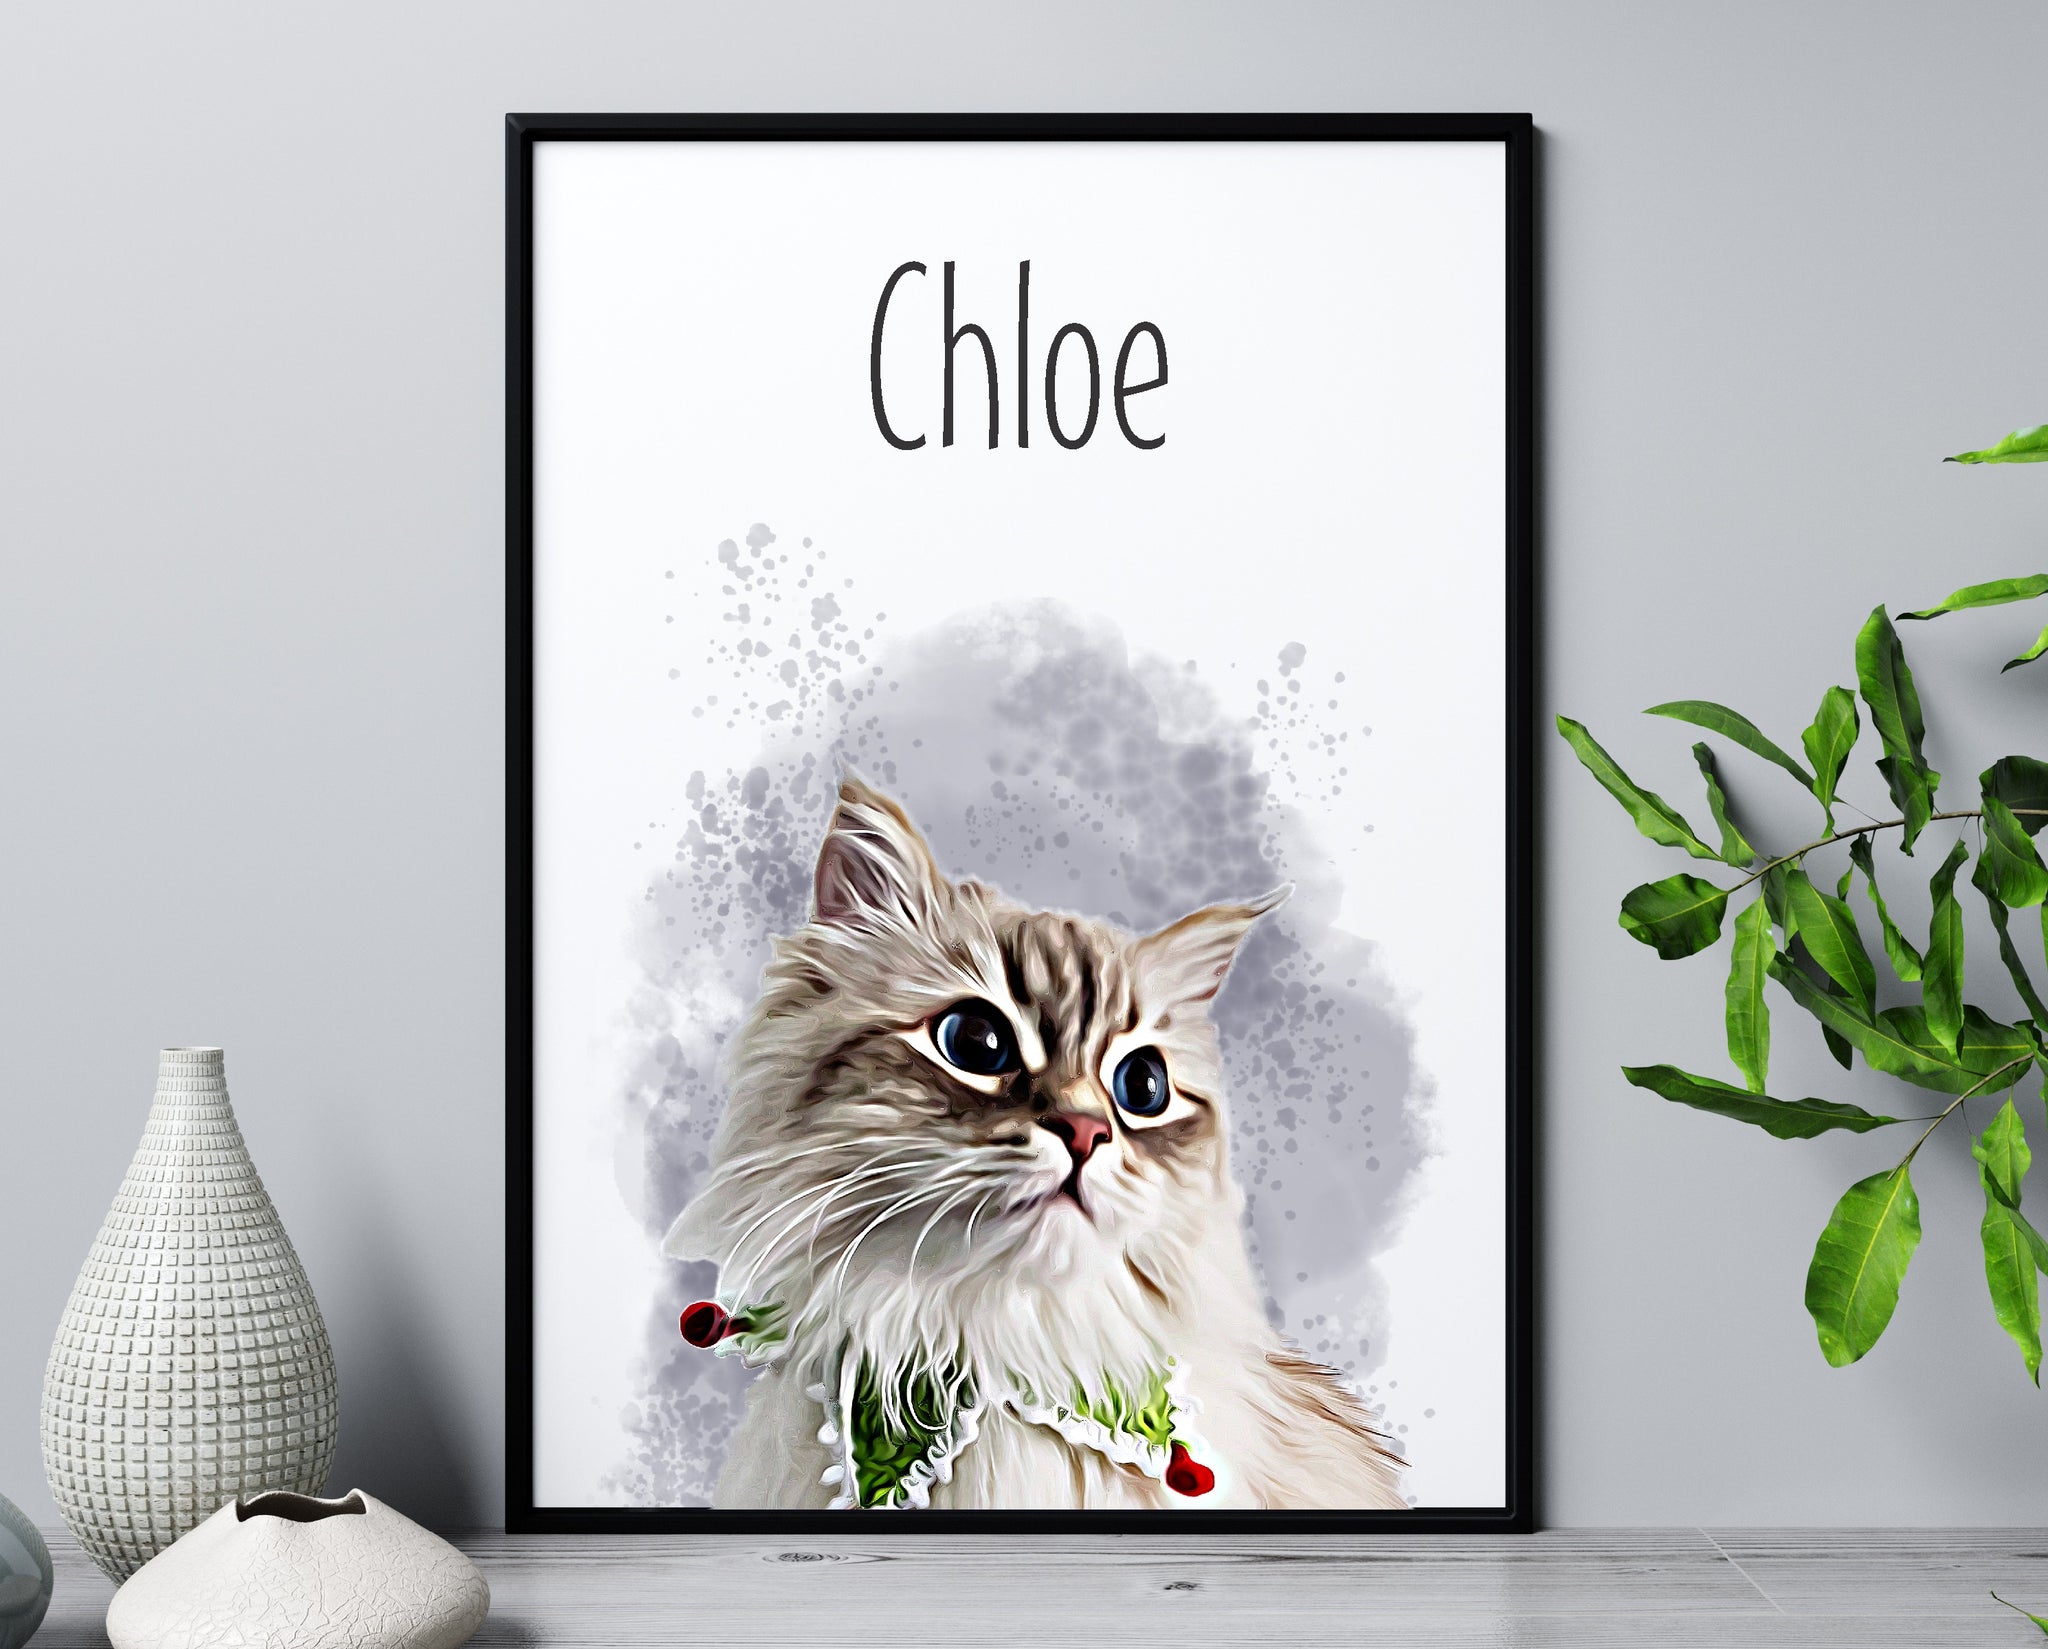 cat pet portrait painting or watercolor printed on a canvas with a splatter background and the cat's name 